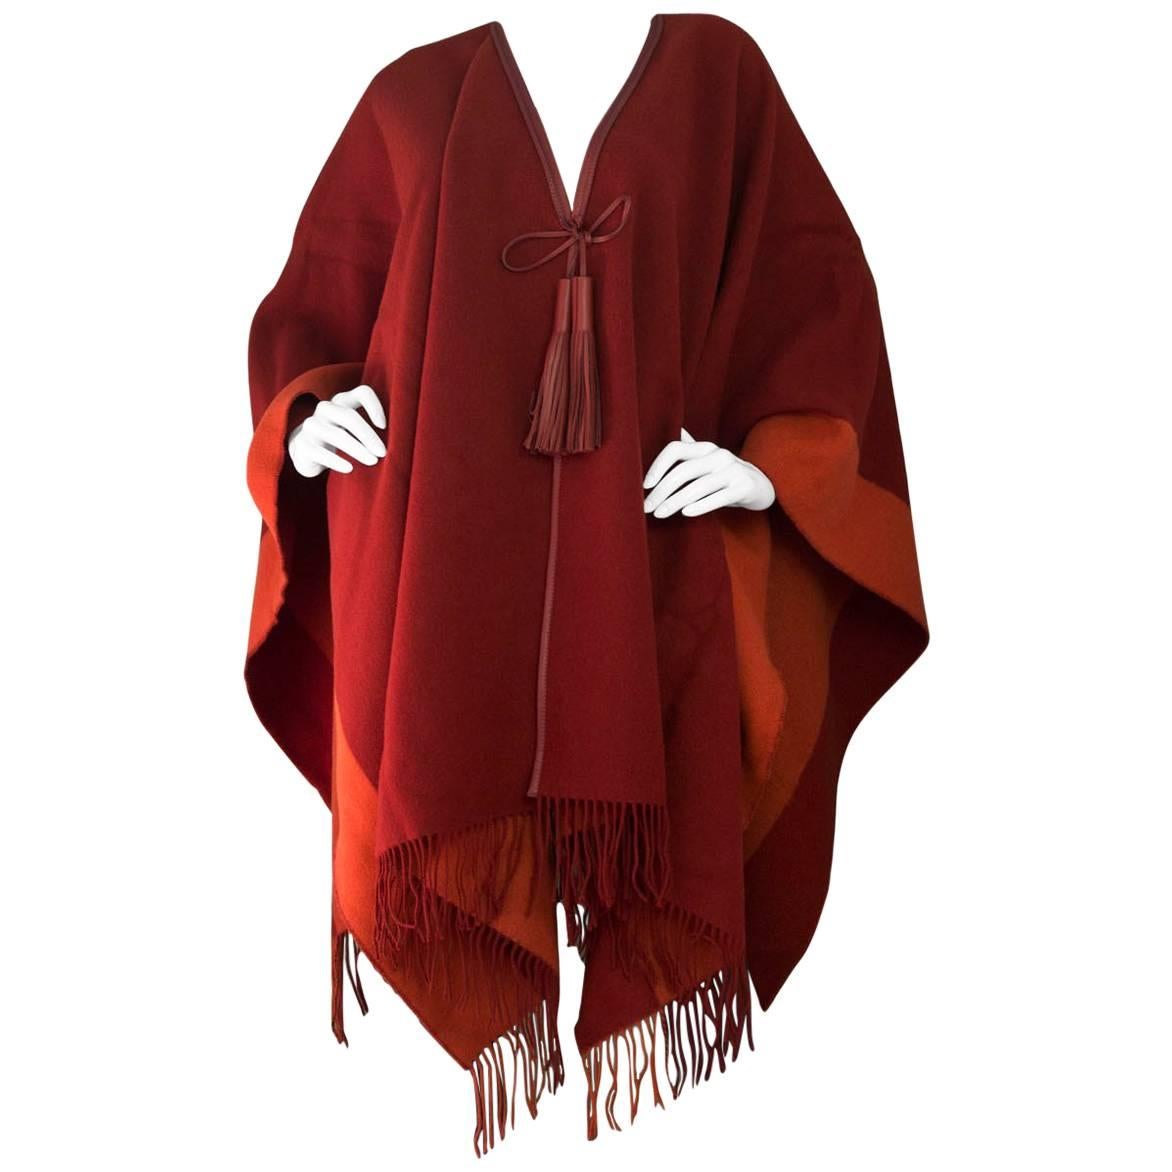 Hermes Burgundy Wool Rocabar Poncho Cape with Box